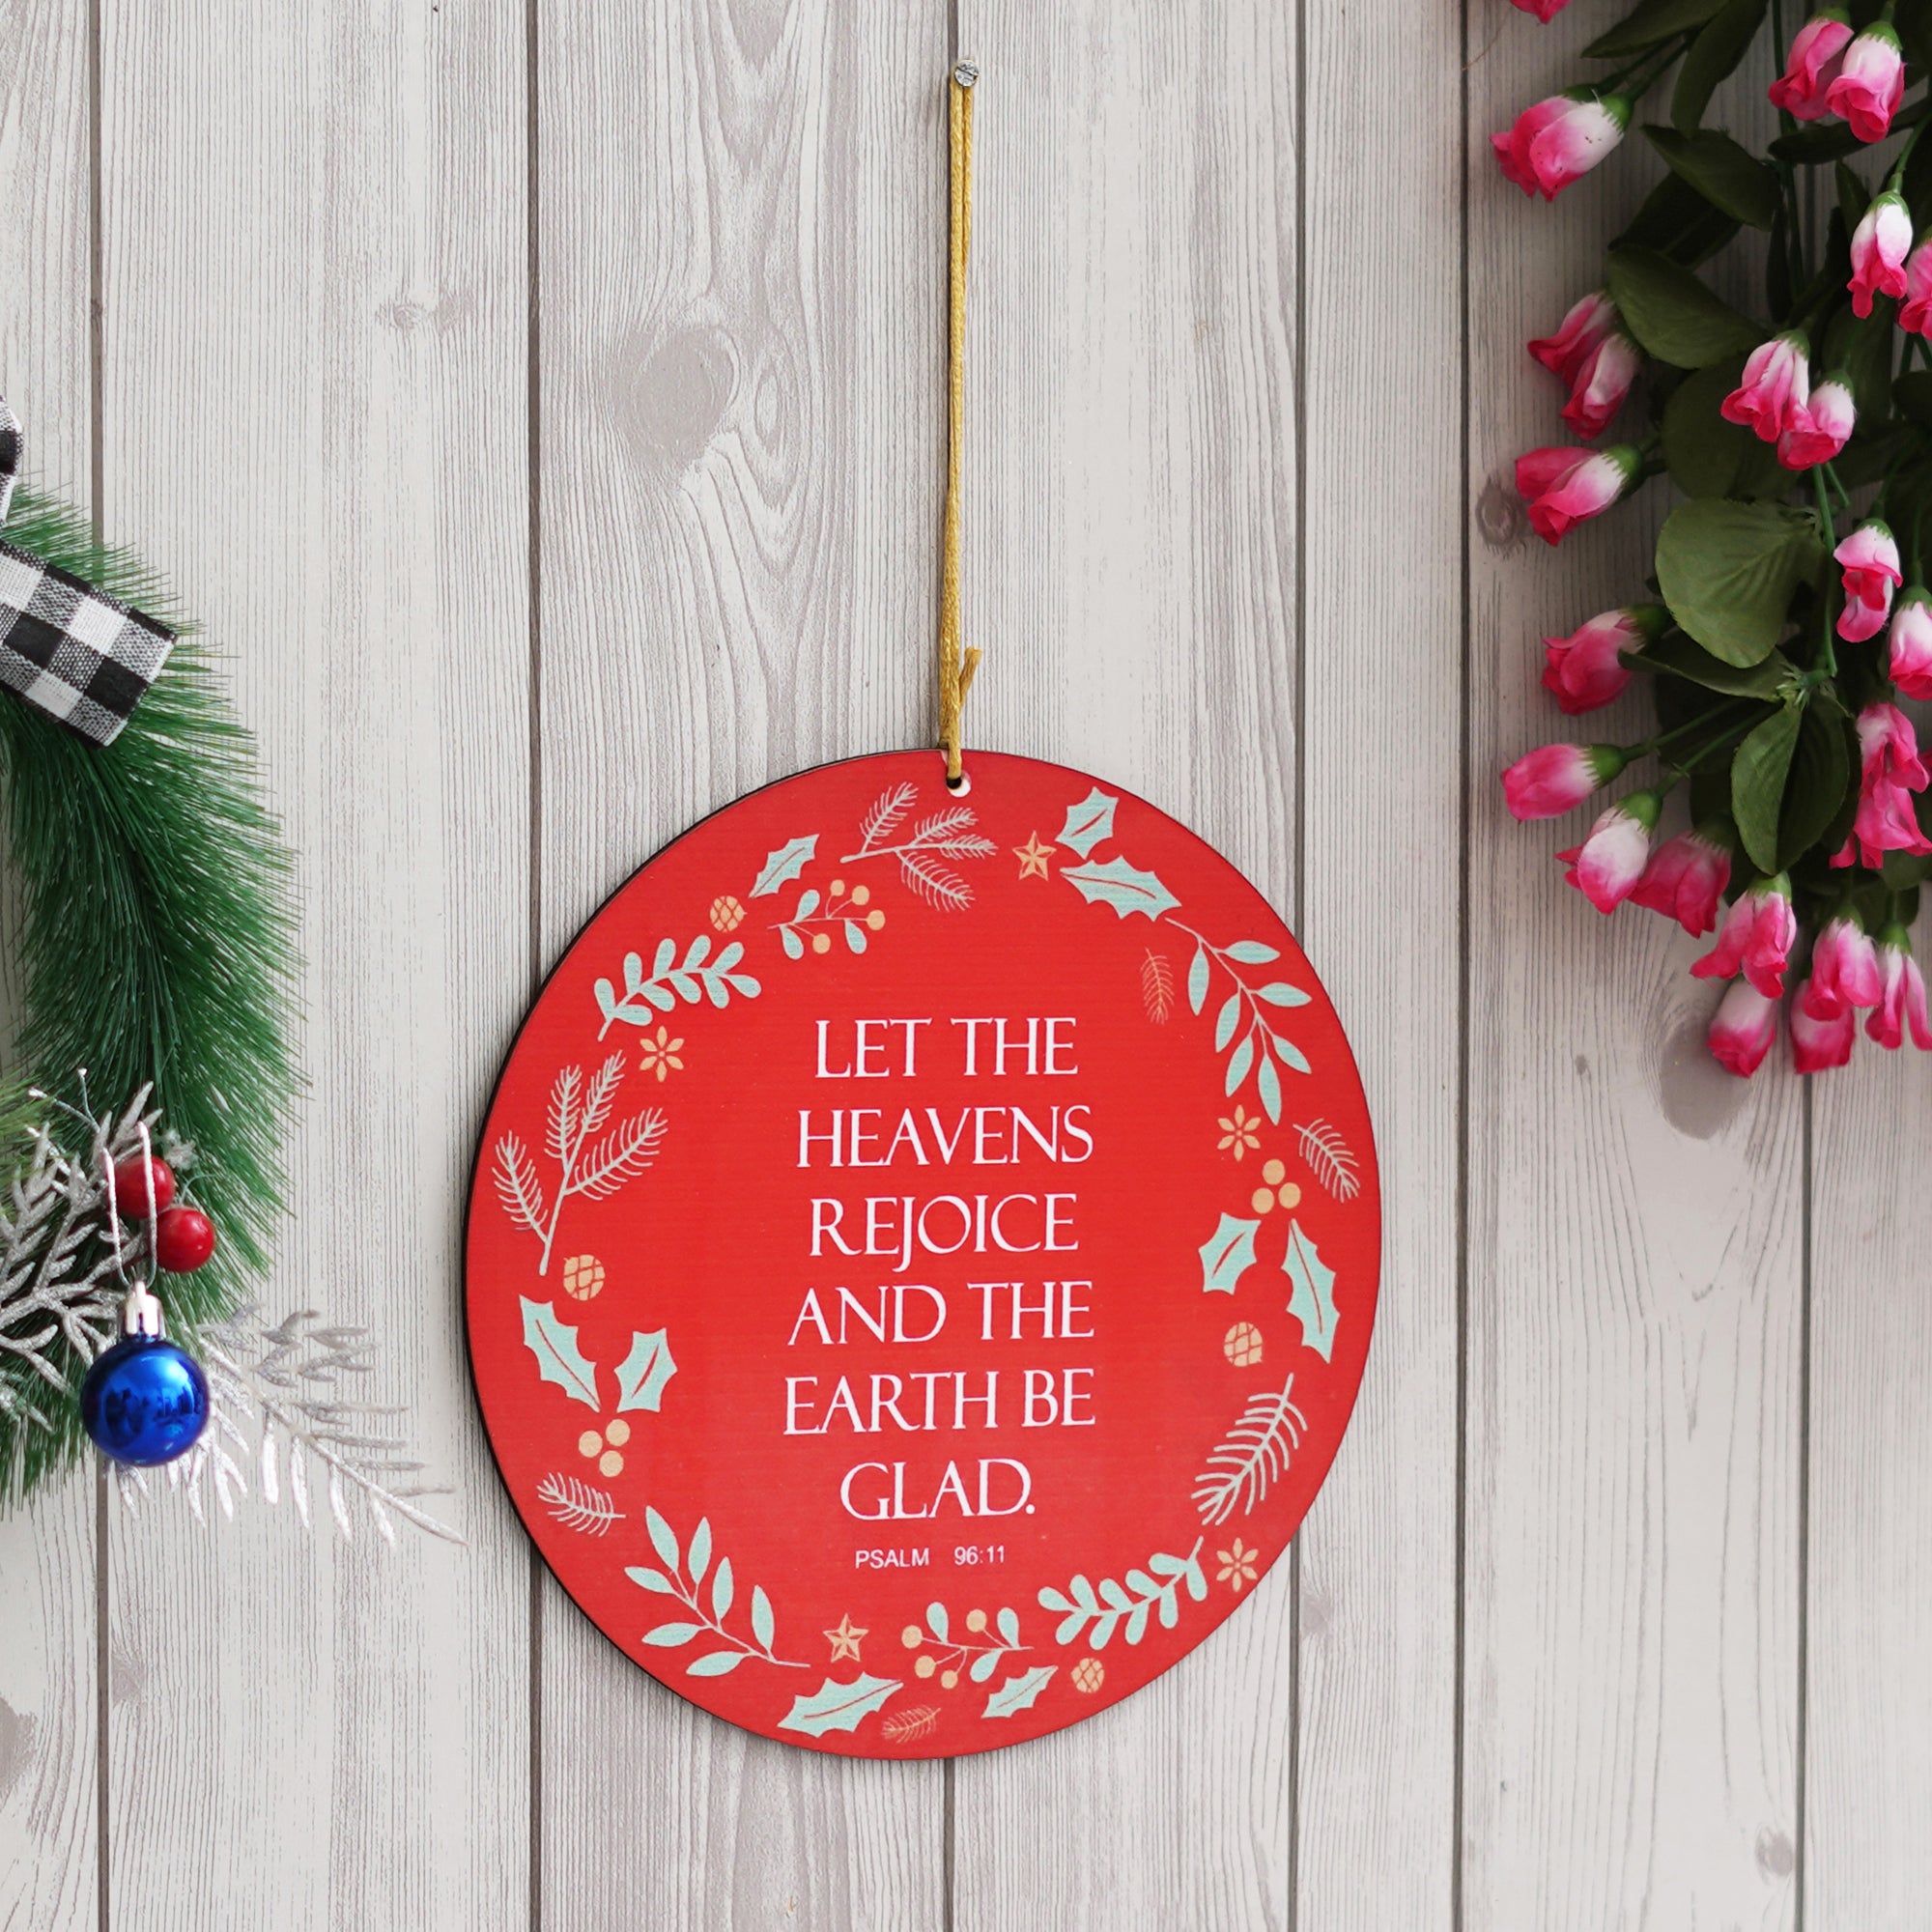 eCraftIndia "LET THE HEAVENS REJOICE AND THE EARTH BE GLAD. PSALM 96:11" Printed Merry Christmas Wooden Door Wall Hanging Ornaments for Home Decoration (Red, Green, White) 5